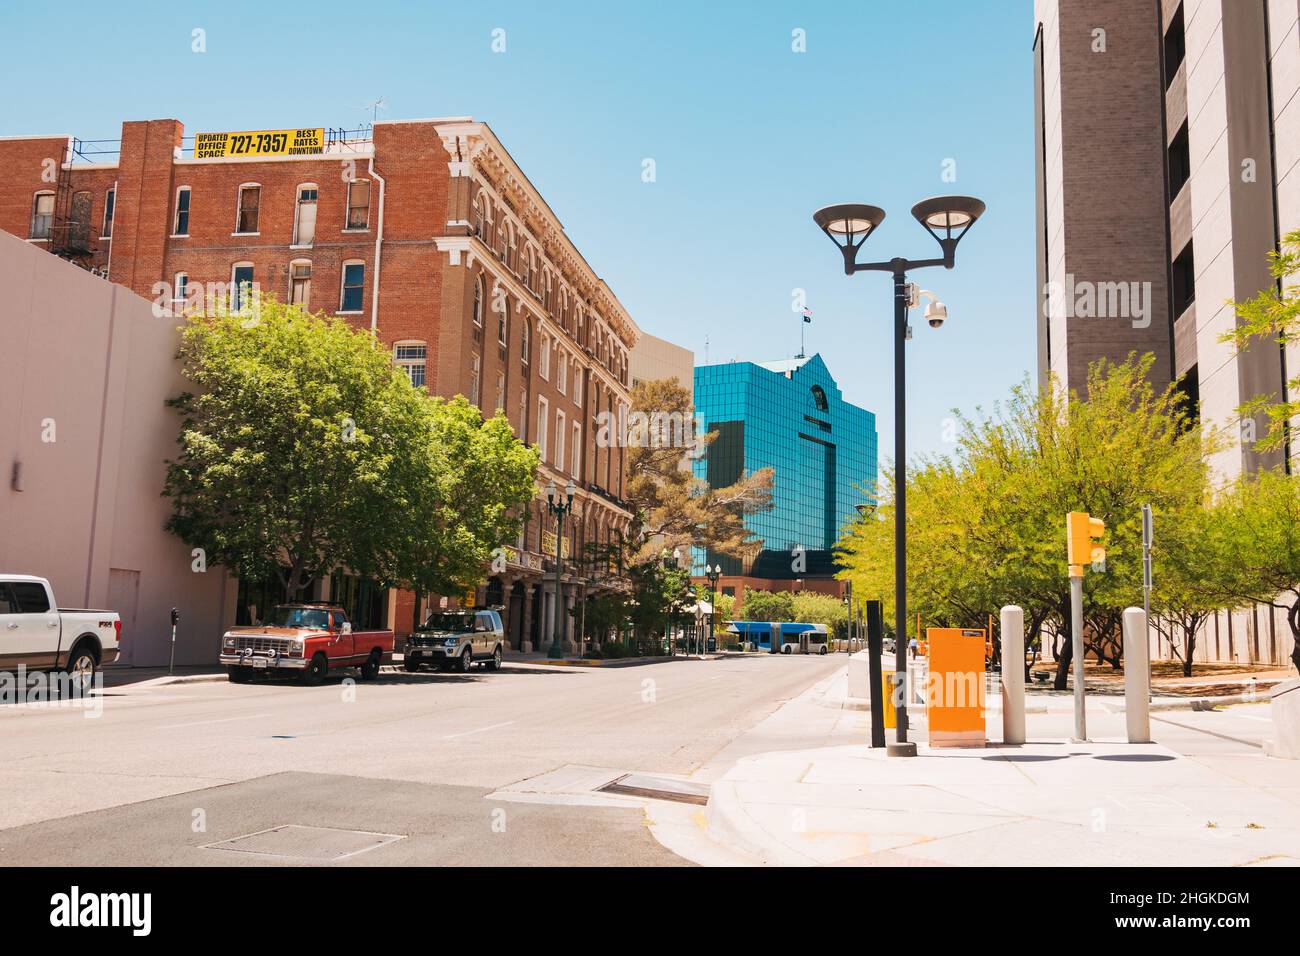 Amongst the brick and glass buildings downtown in the city of El Paso, Texas, USA Stock Photo